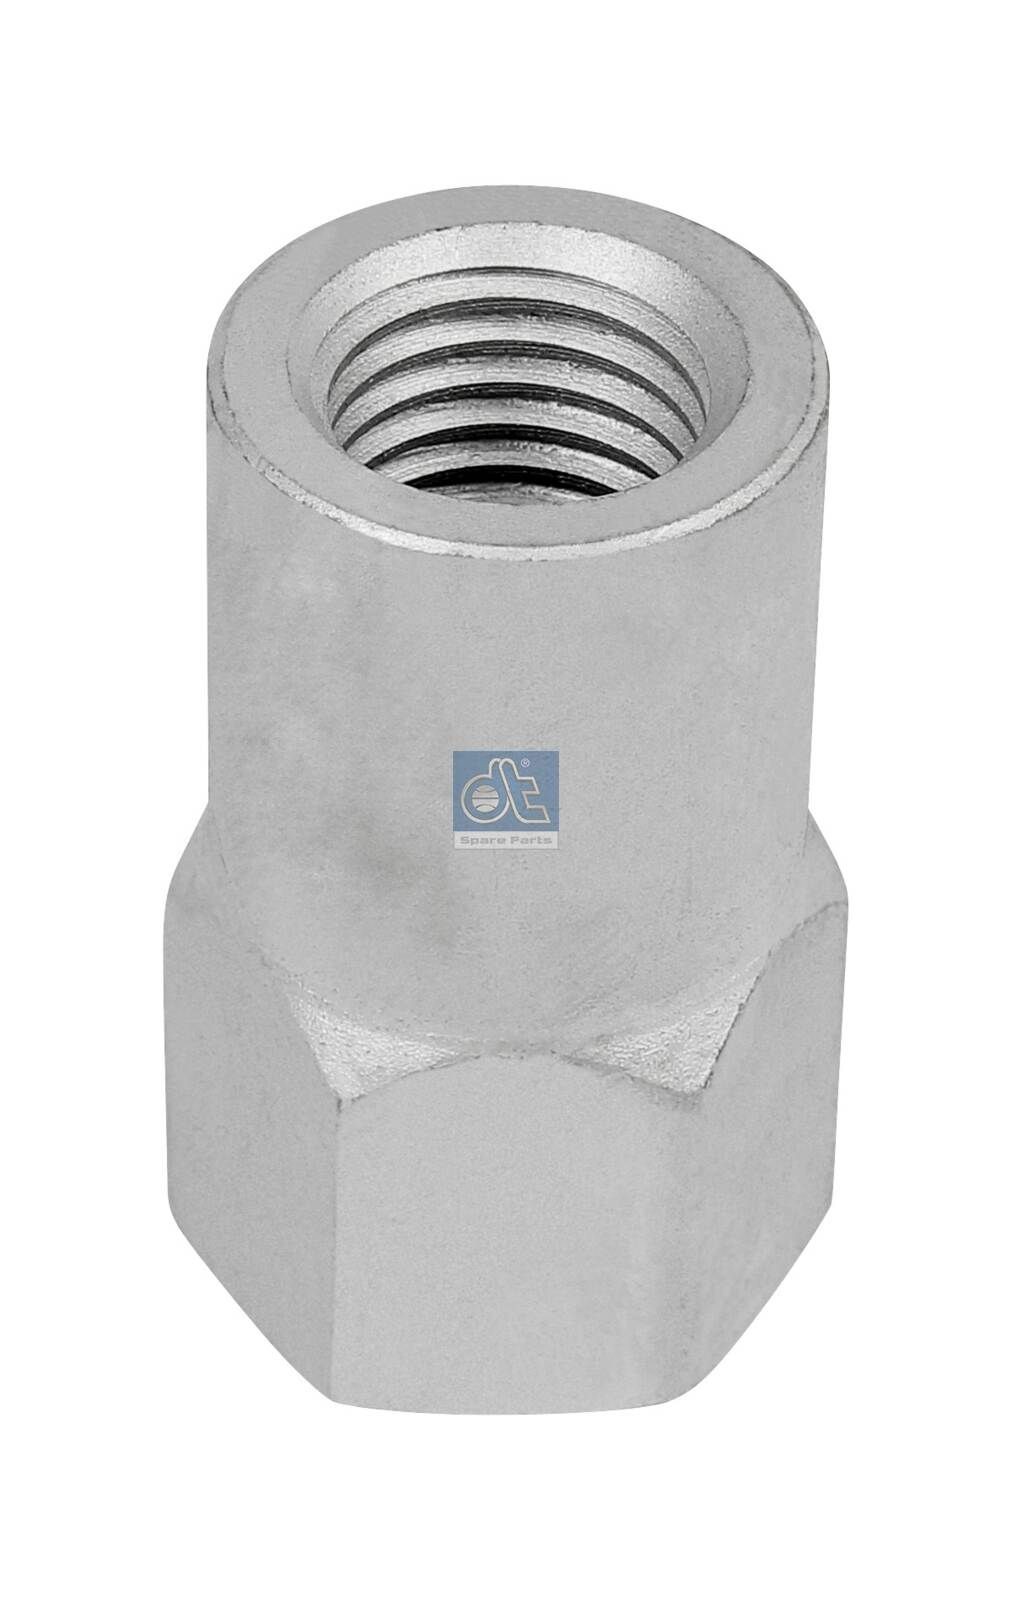 DT Spare Parts 1.25437 Spring Clamp Nut 1 369 806